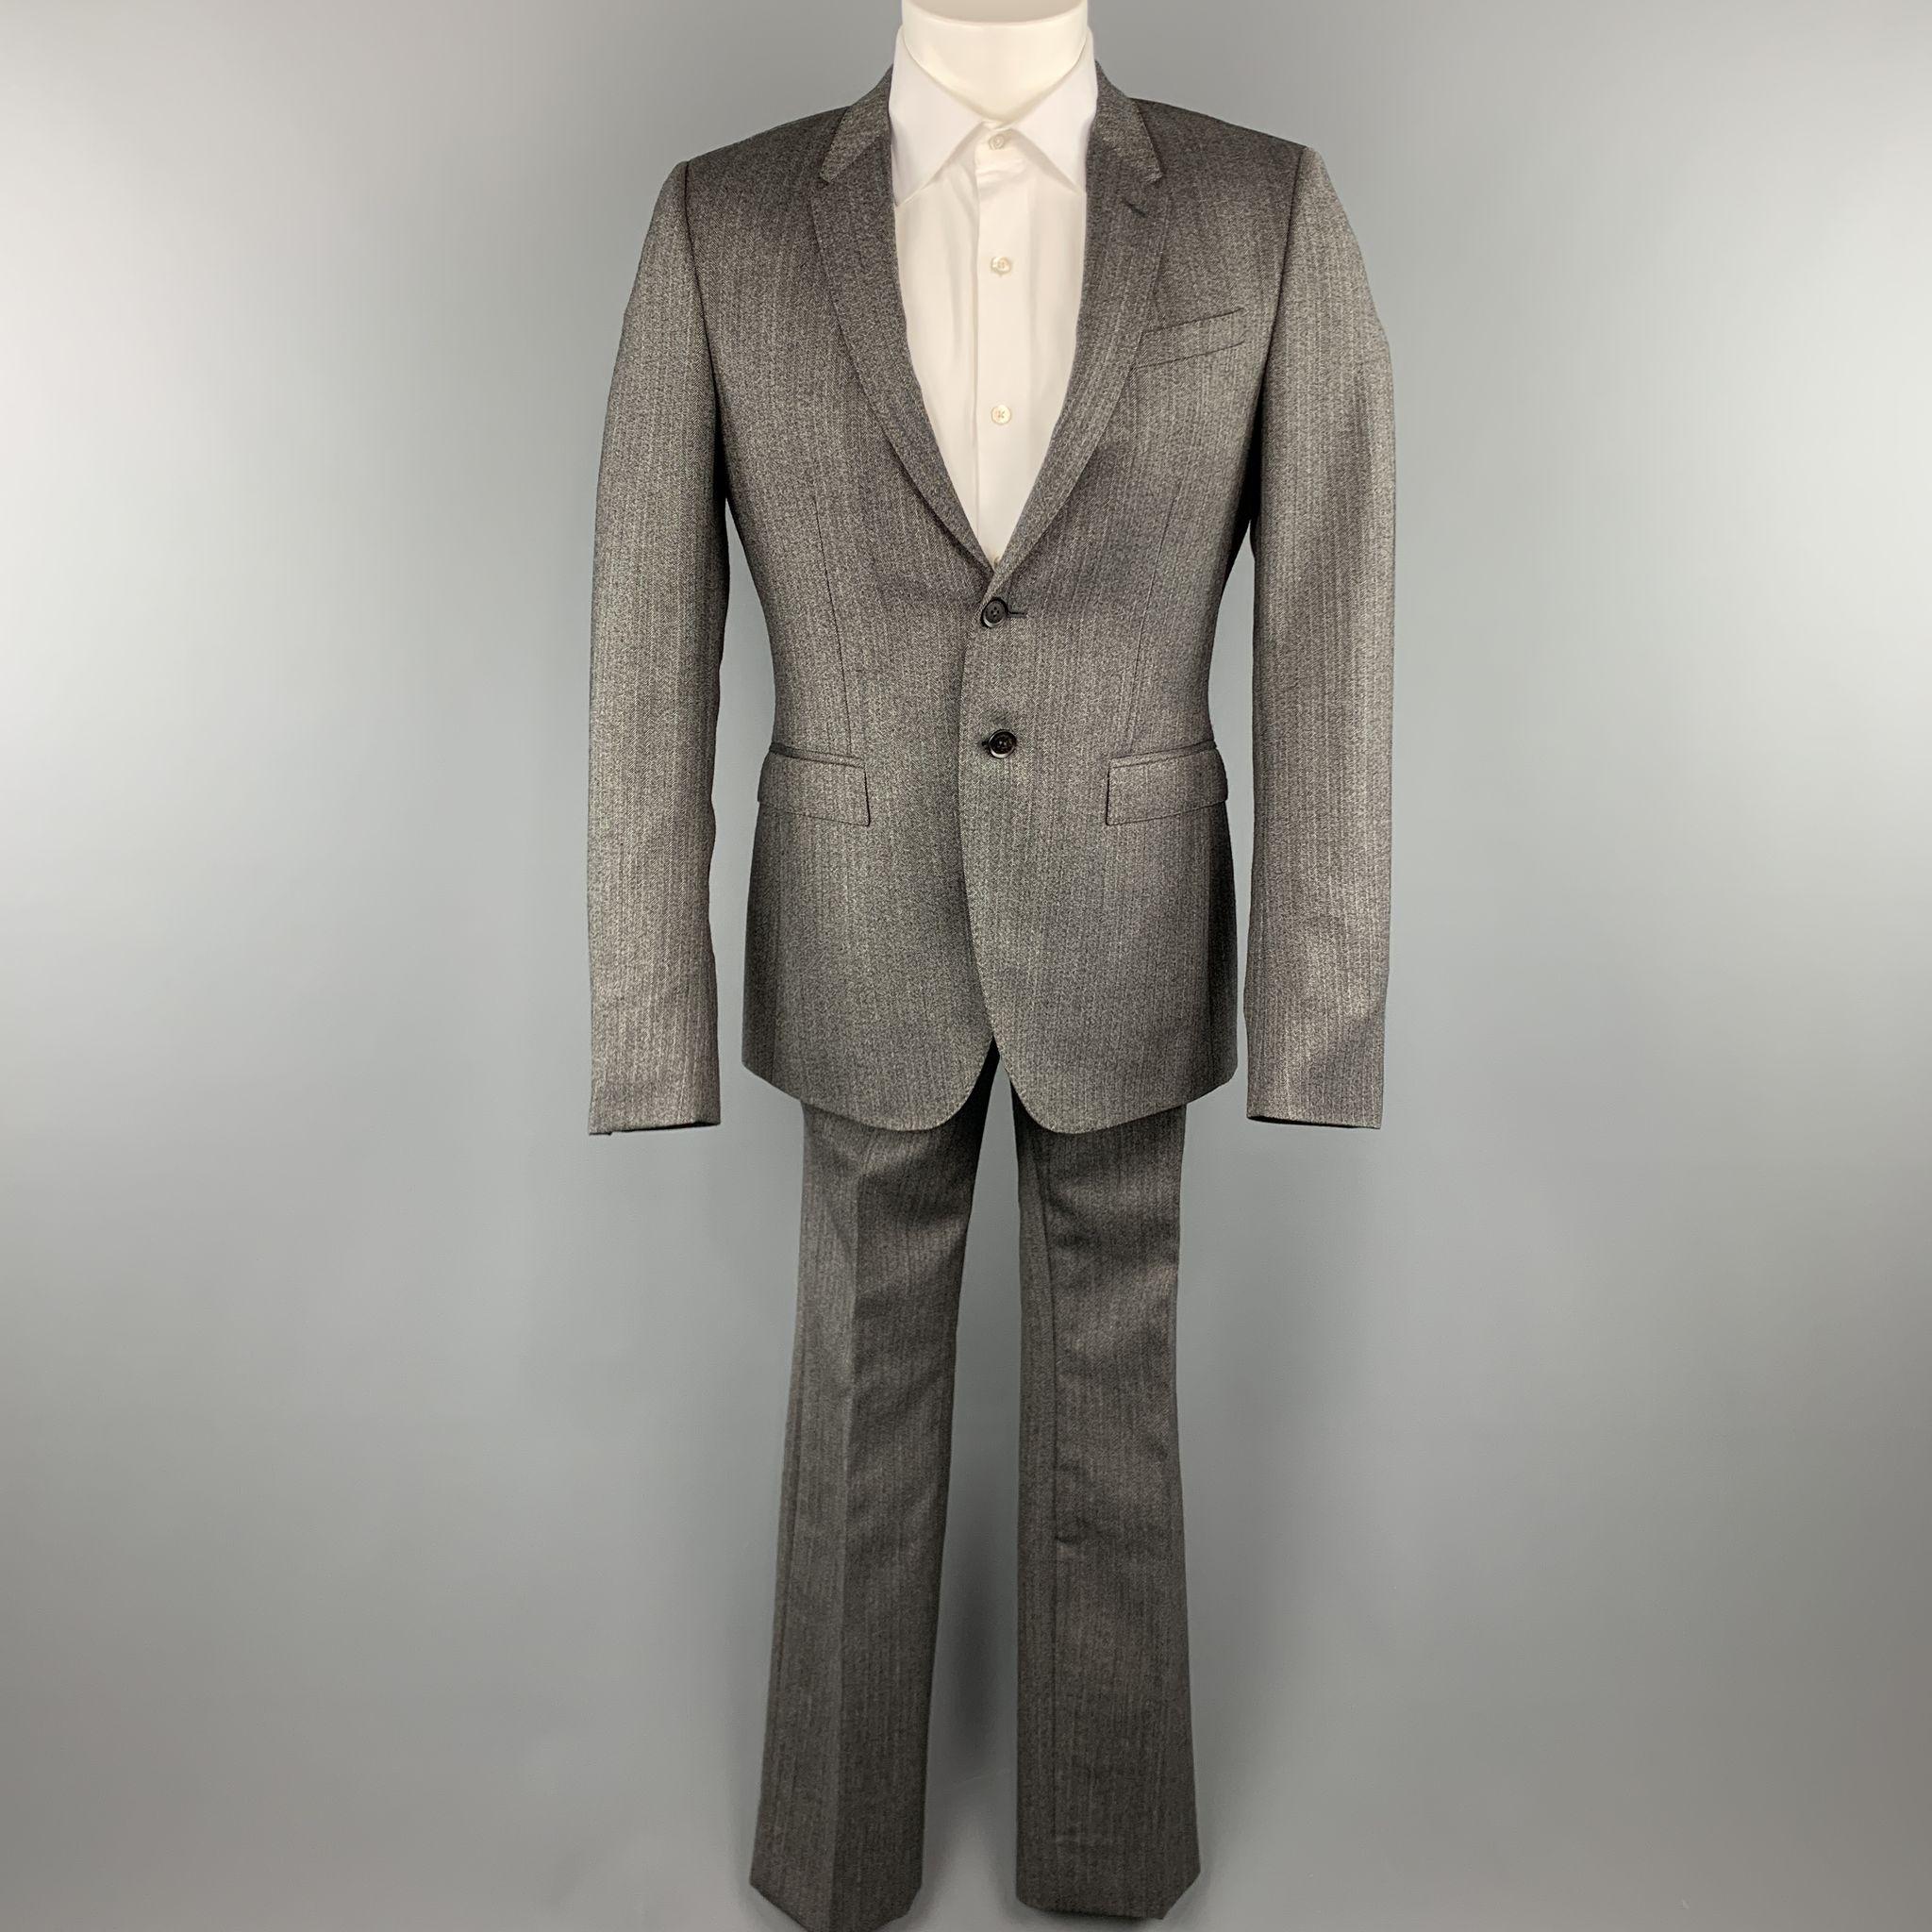 BURBERRY PRORSUM suit comes in a grey herringbone and includes a single breasted, two button sport coat with notch lapel and matching front trousers. 

Excellent Pre-Owned Condition.
Marked: 50

Measurements:

-Jacket
Shoulder: 16.5 in. 
Chest: 40